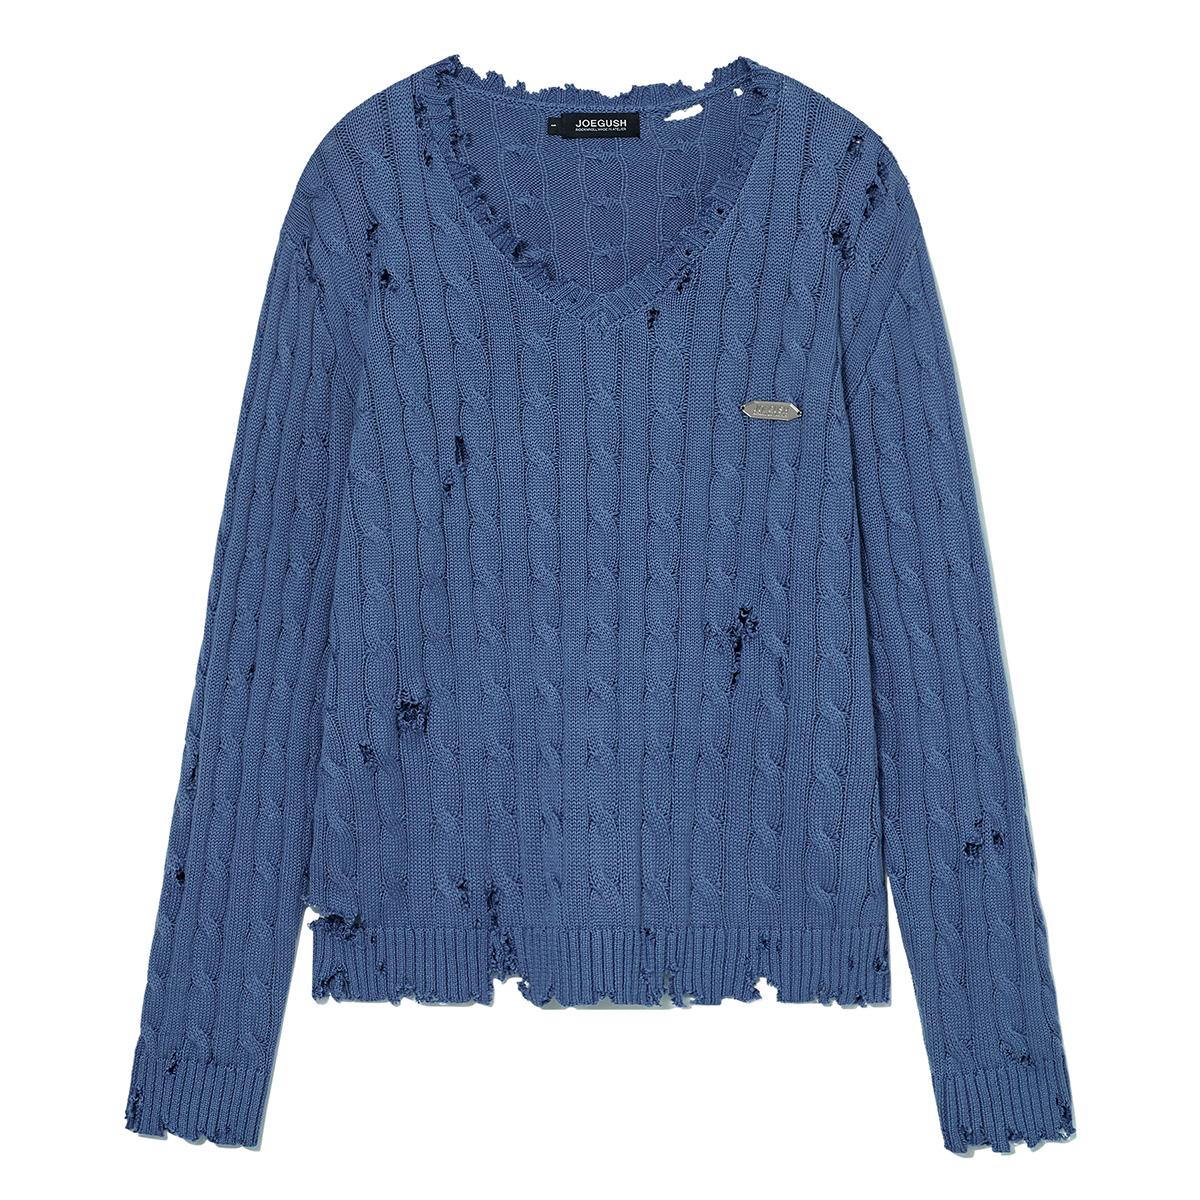 Distressed Cable knit LV.2 (Smoke Blue) [04/03 배송]